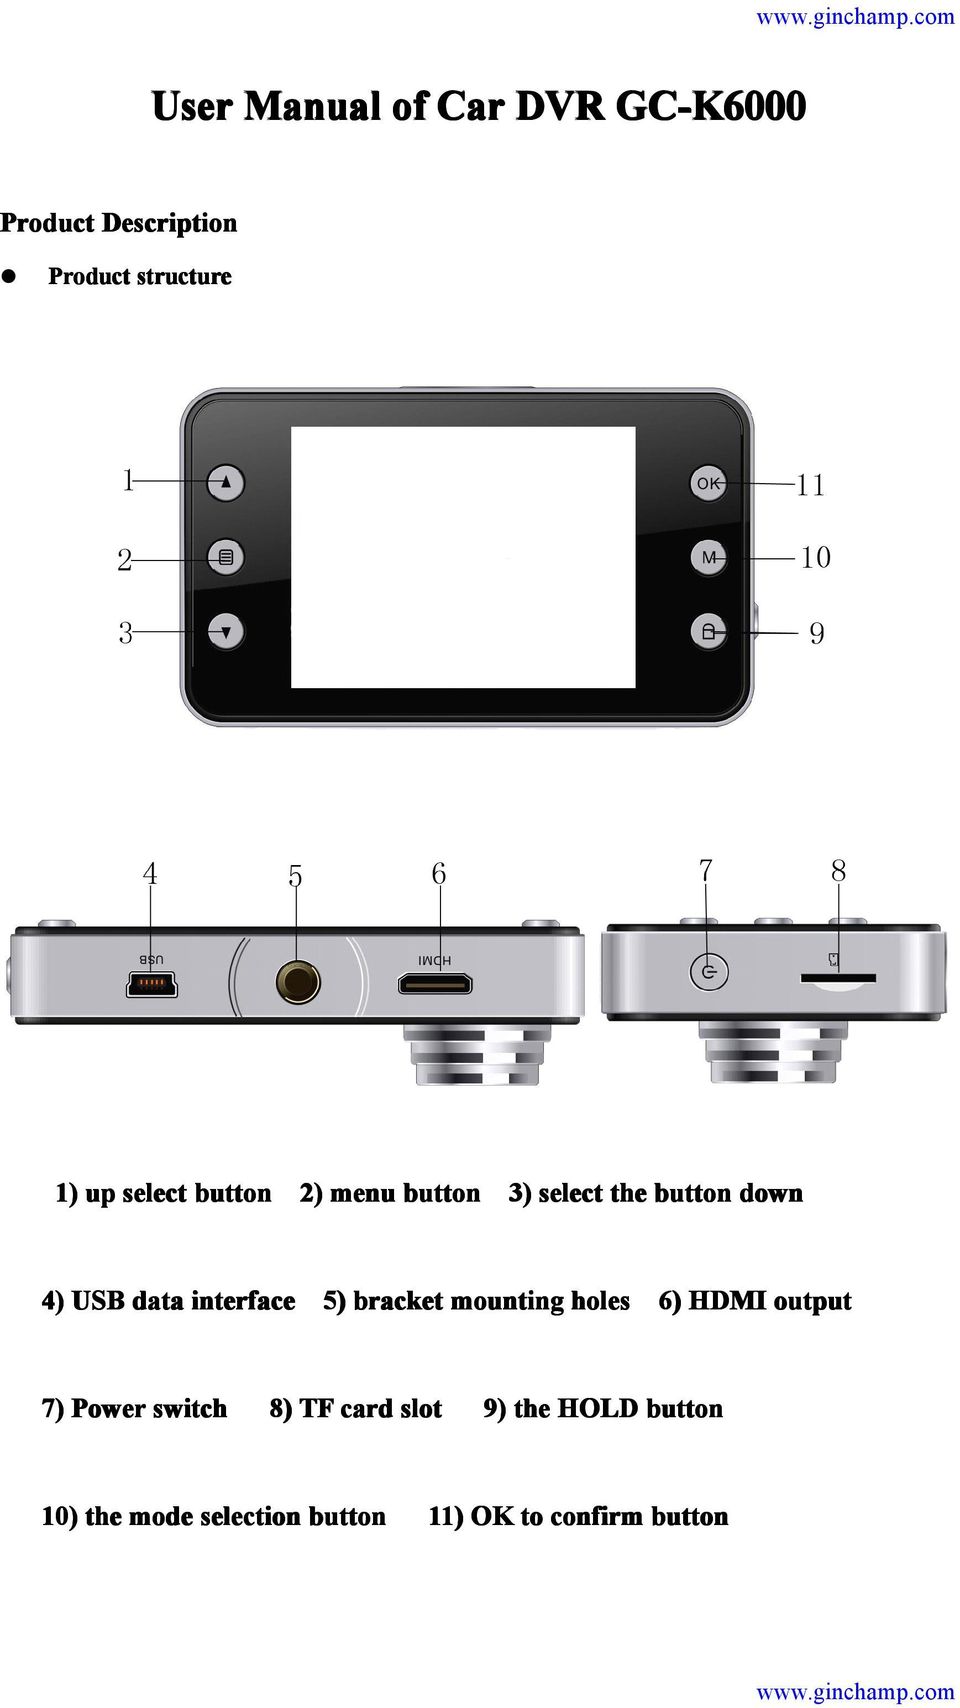 interface 5) bracket mounting holes 6) HDMI output 7) Power switch 8) TF